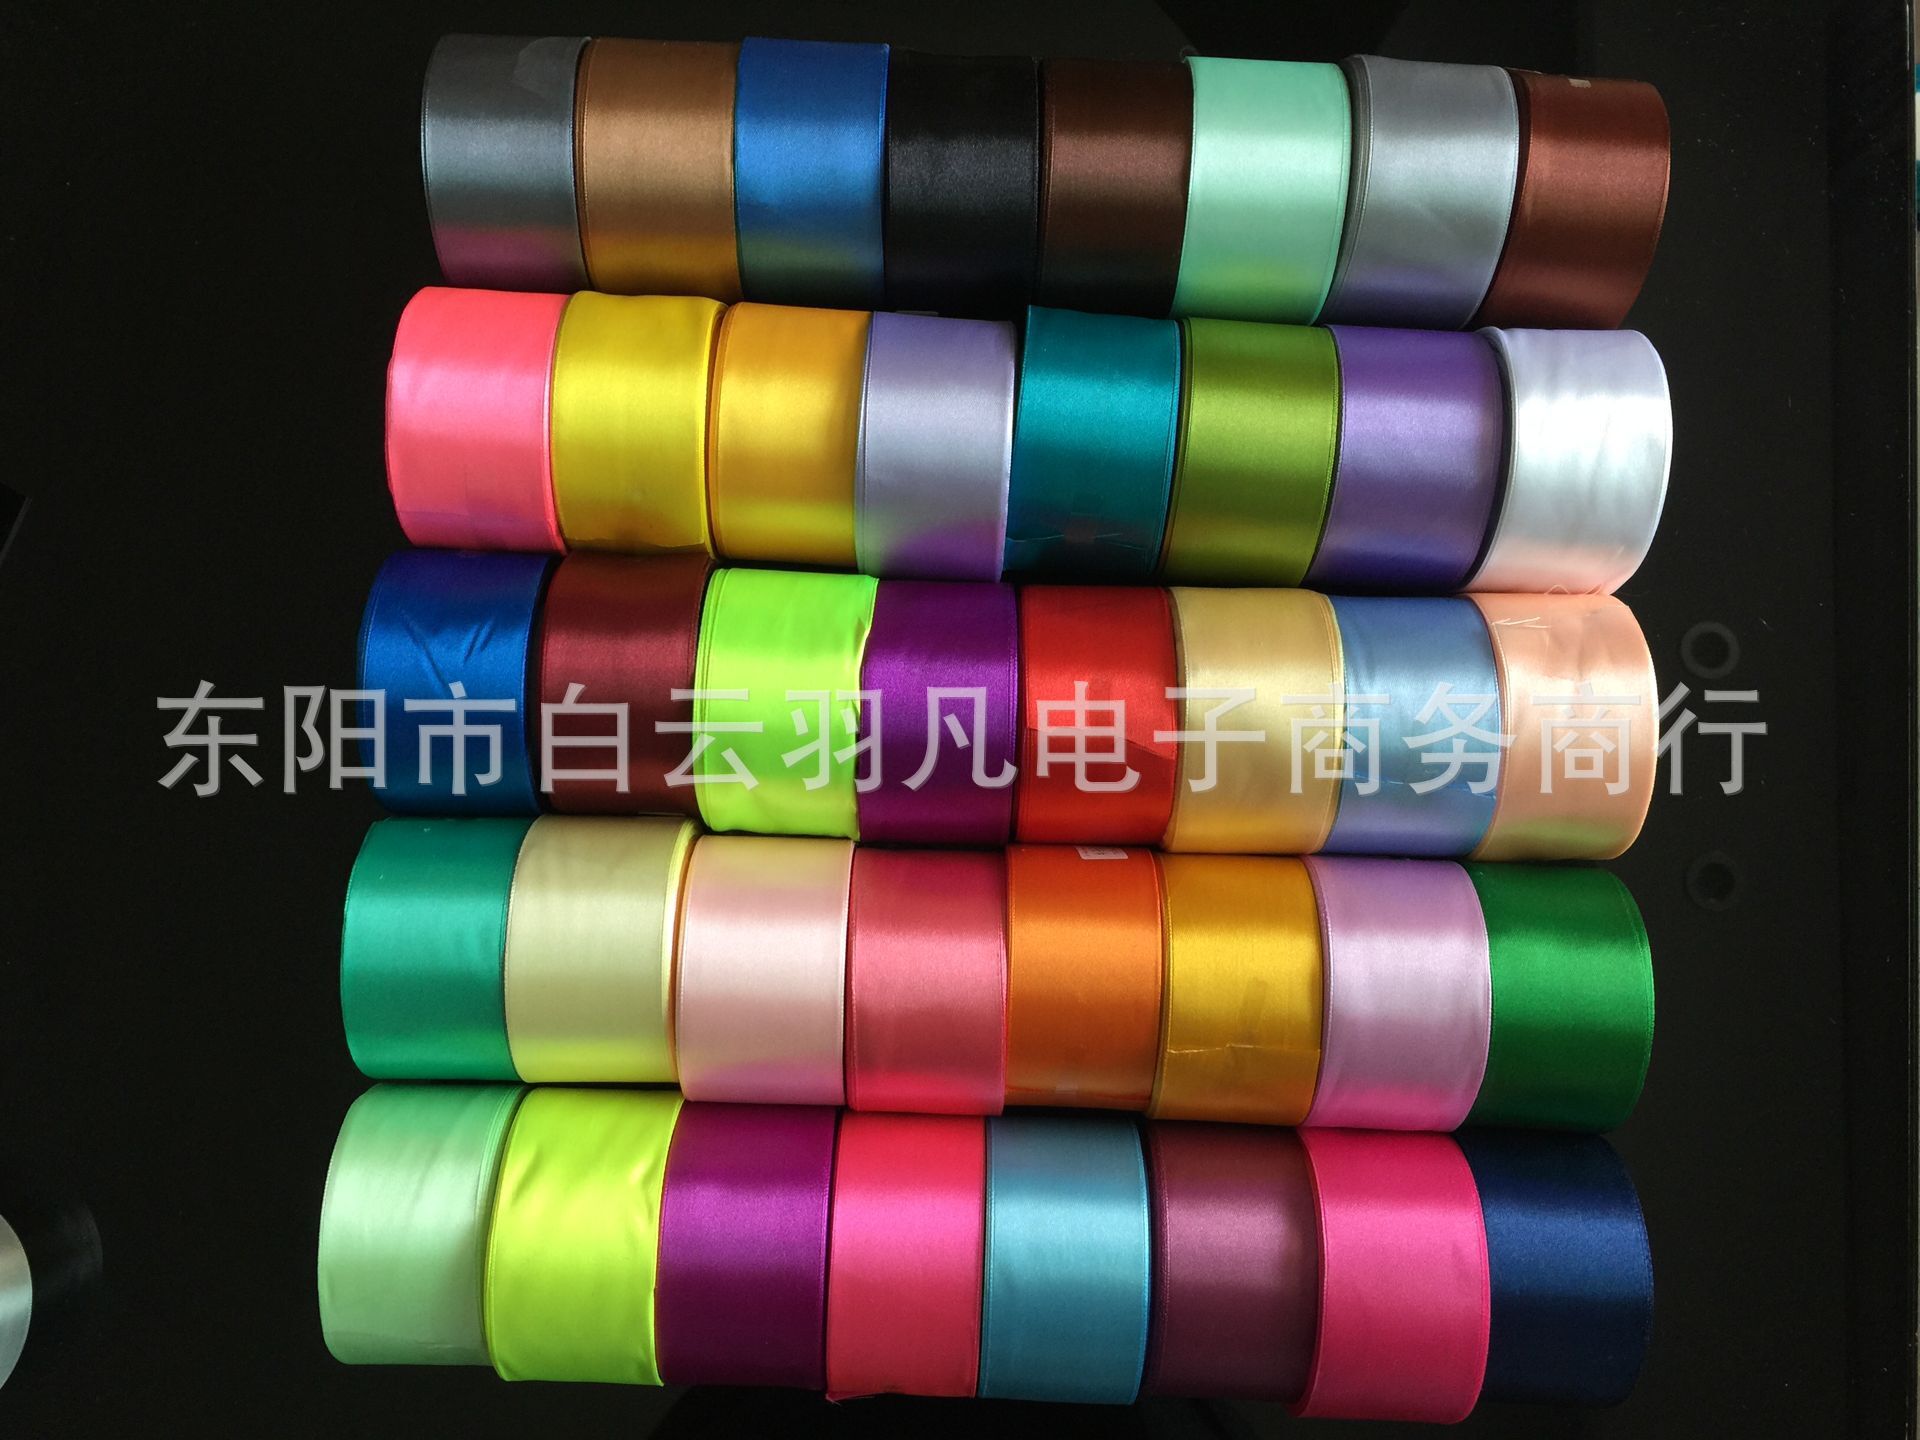 16 Points Dacron Ribbon Package Ribbon Holiday Wedding Site Layout Chair Back 5cm Wide Ribbon in Stock Wholesale